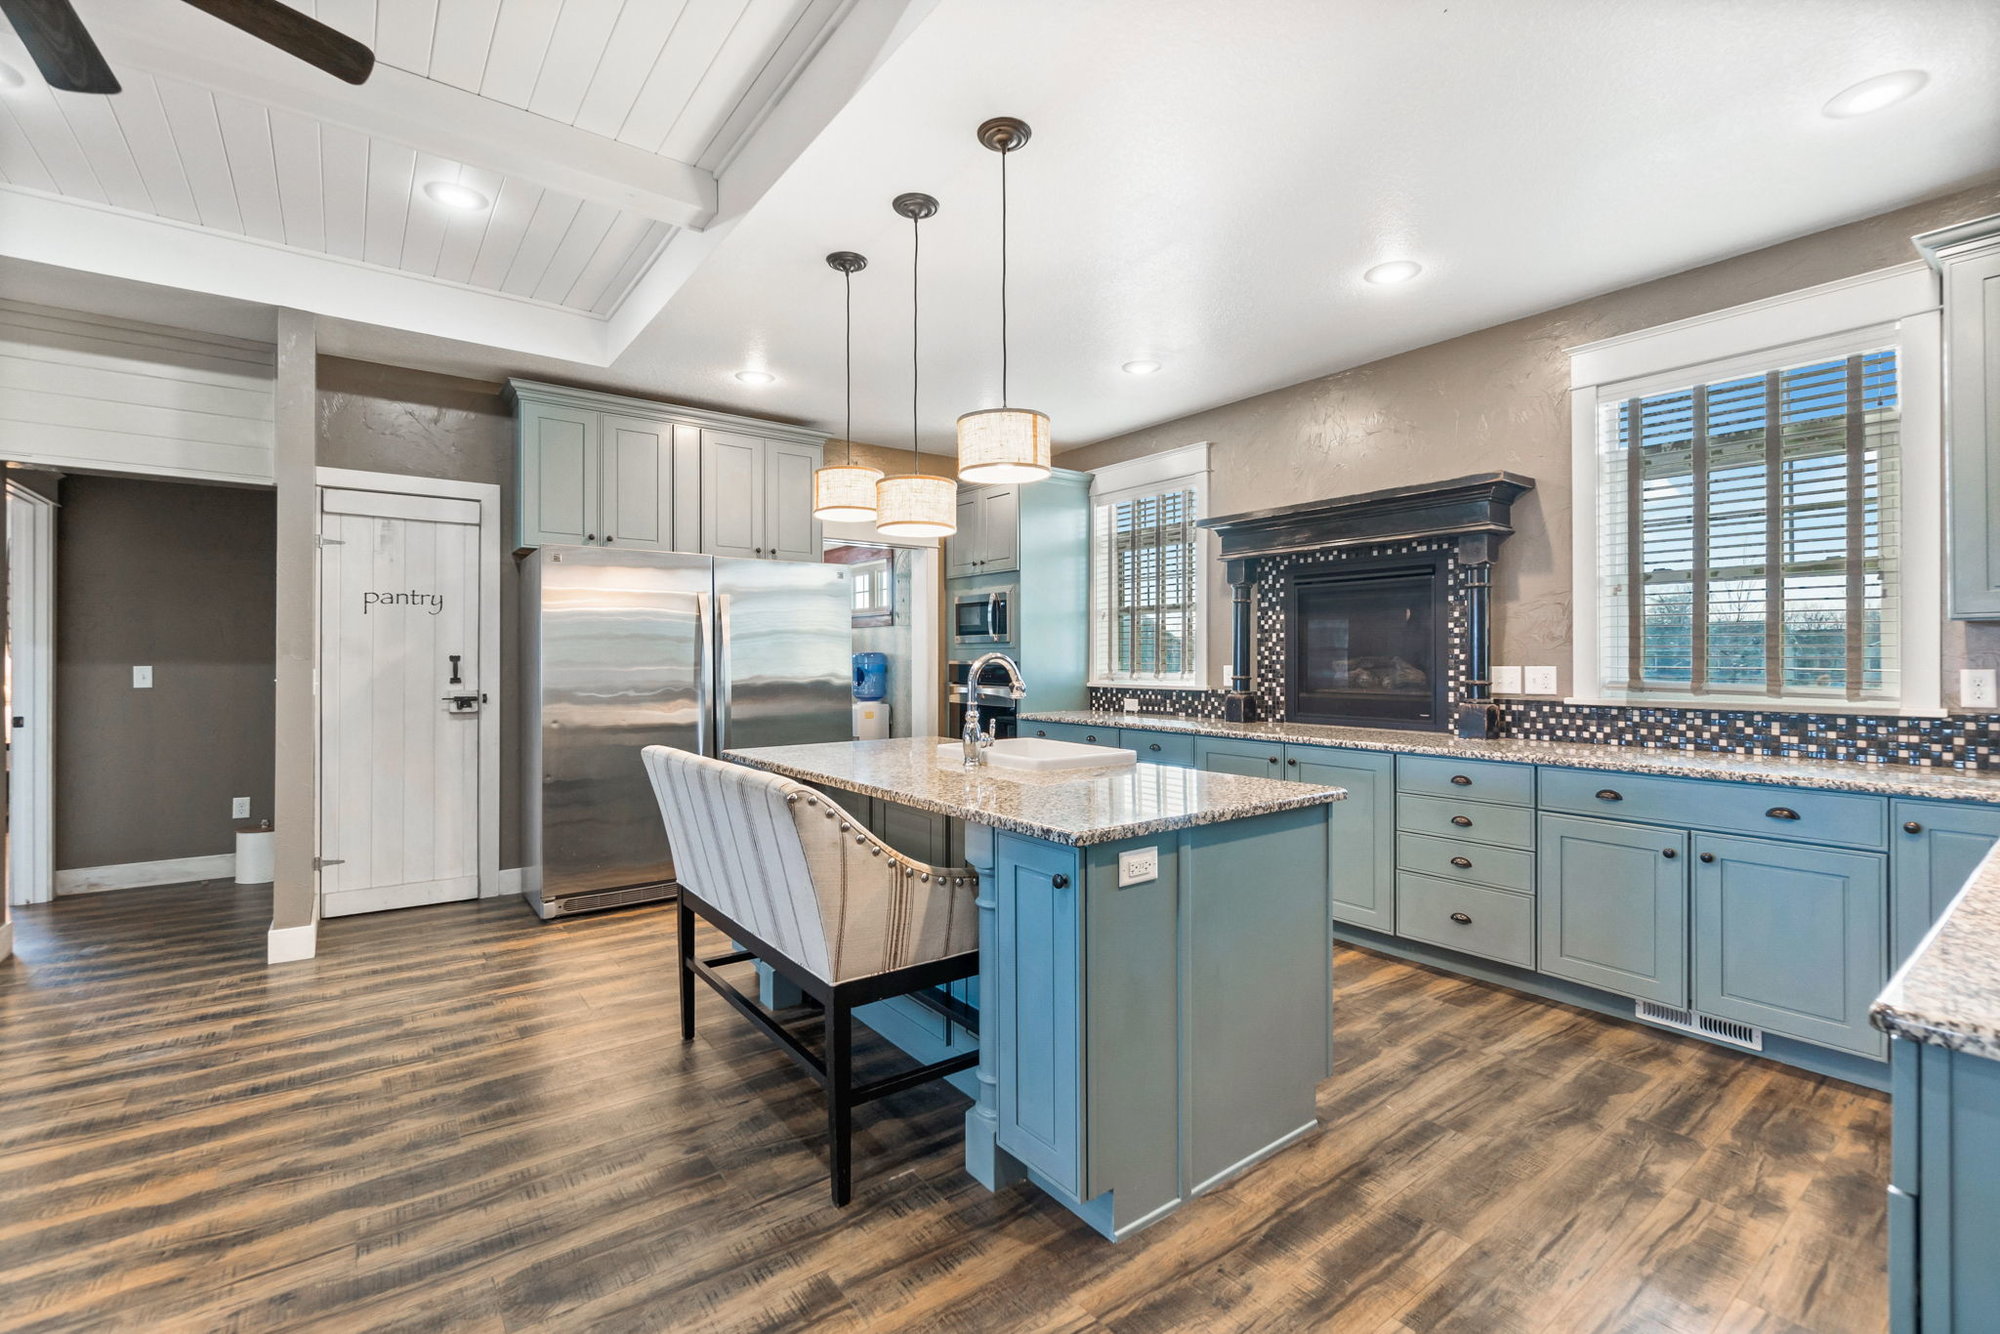 Modern Farmhouse Meets Country Chic in this Beautifully Crafted Custom Home in Independence Iowa